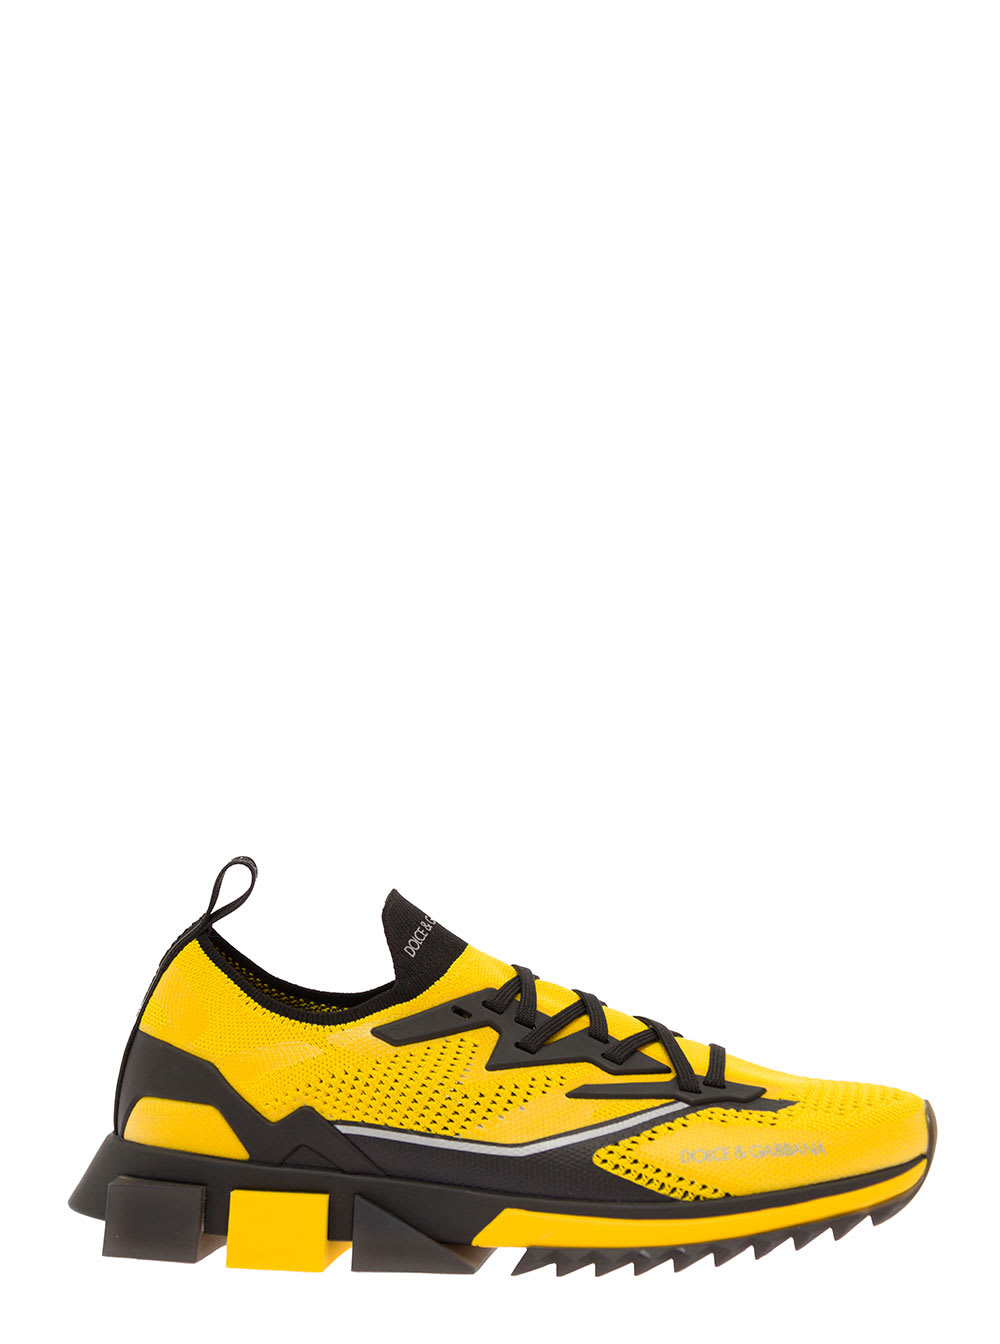 Dolce & Gabbana Mans Yellow And Black Mesh Sorrento Sneakers